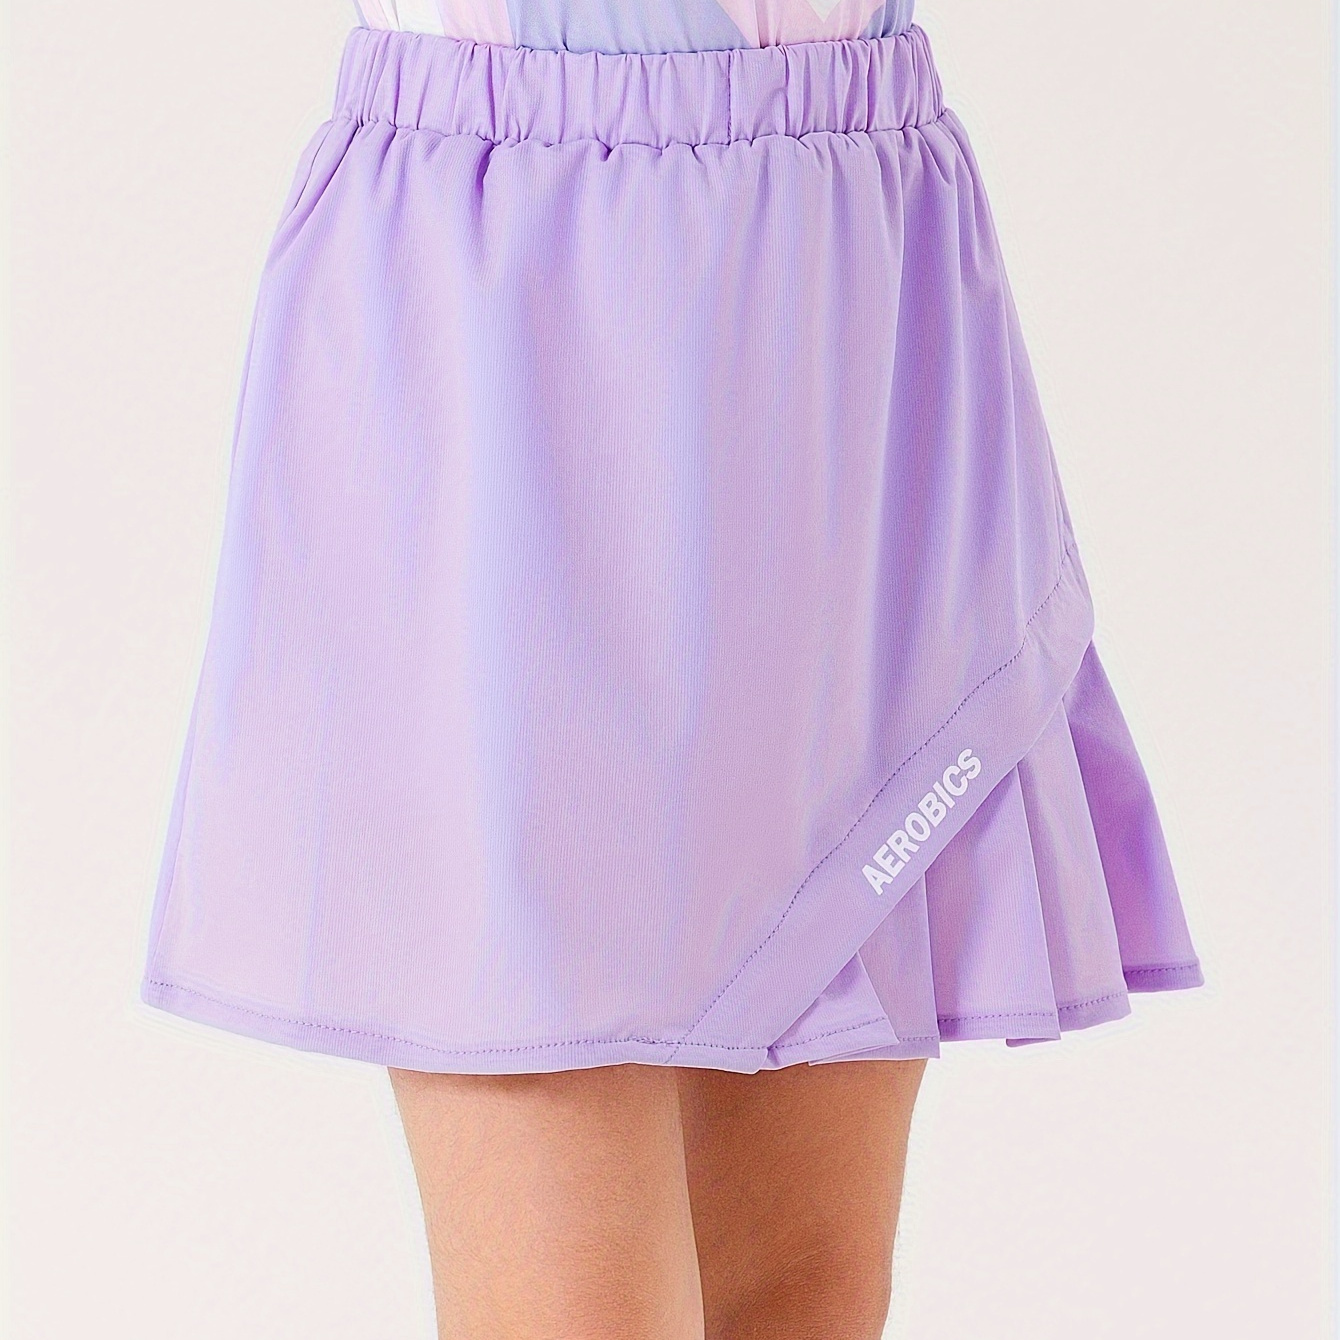 Let's Get to Work Athletic Skort in Purple - Frock Candy